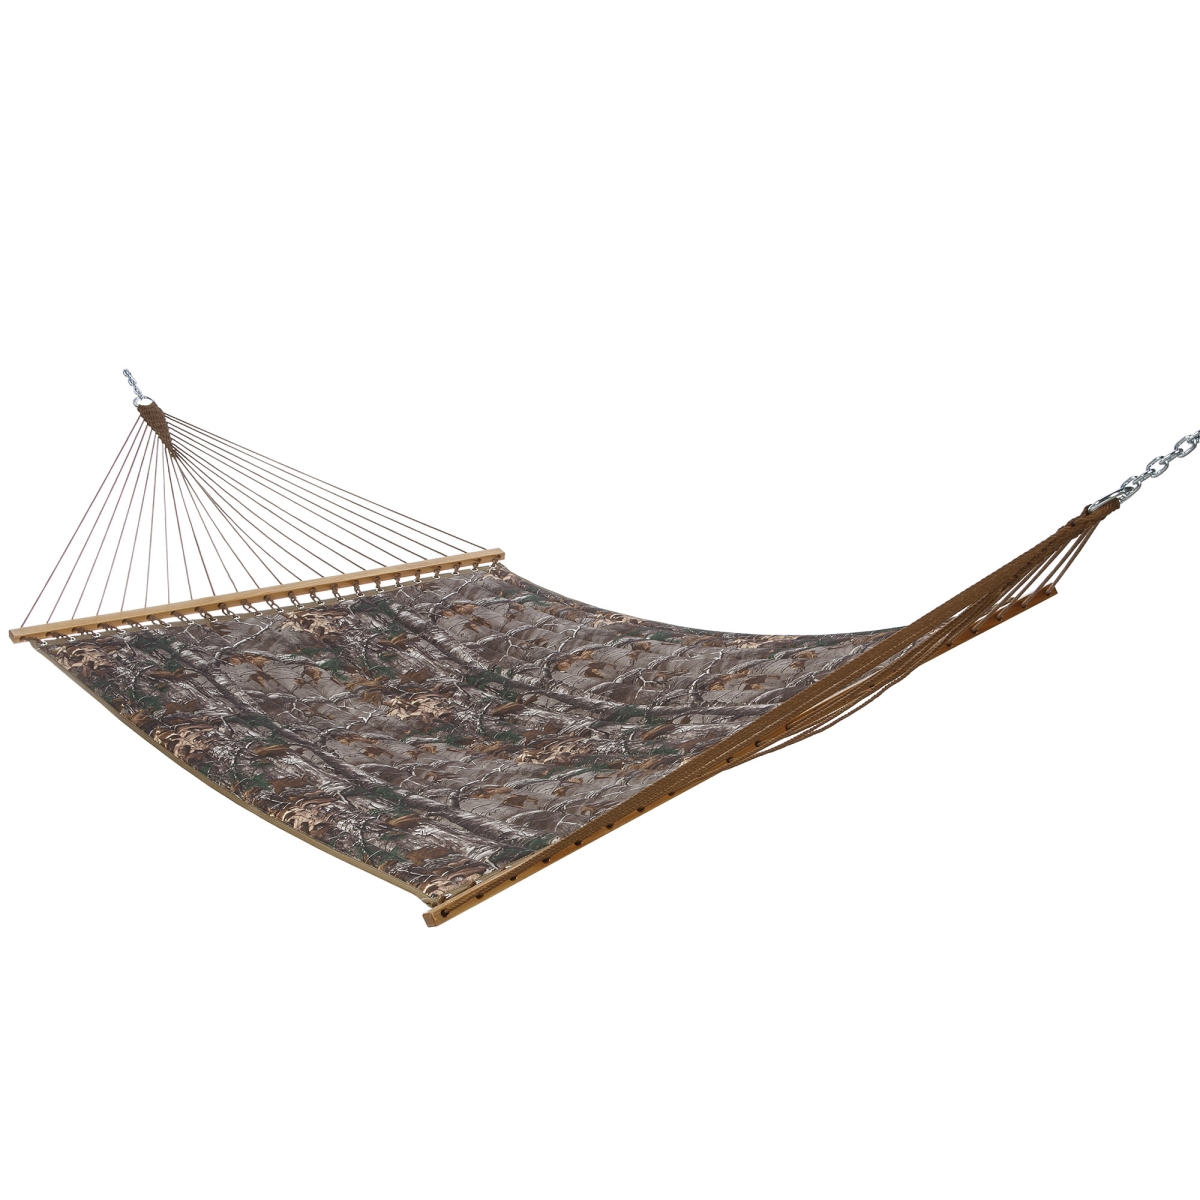 96355403702 Realtree Quilted Hammock